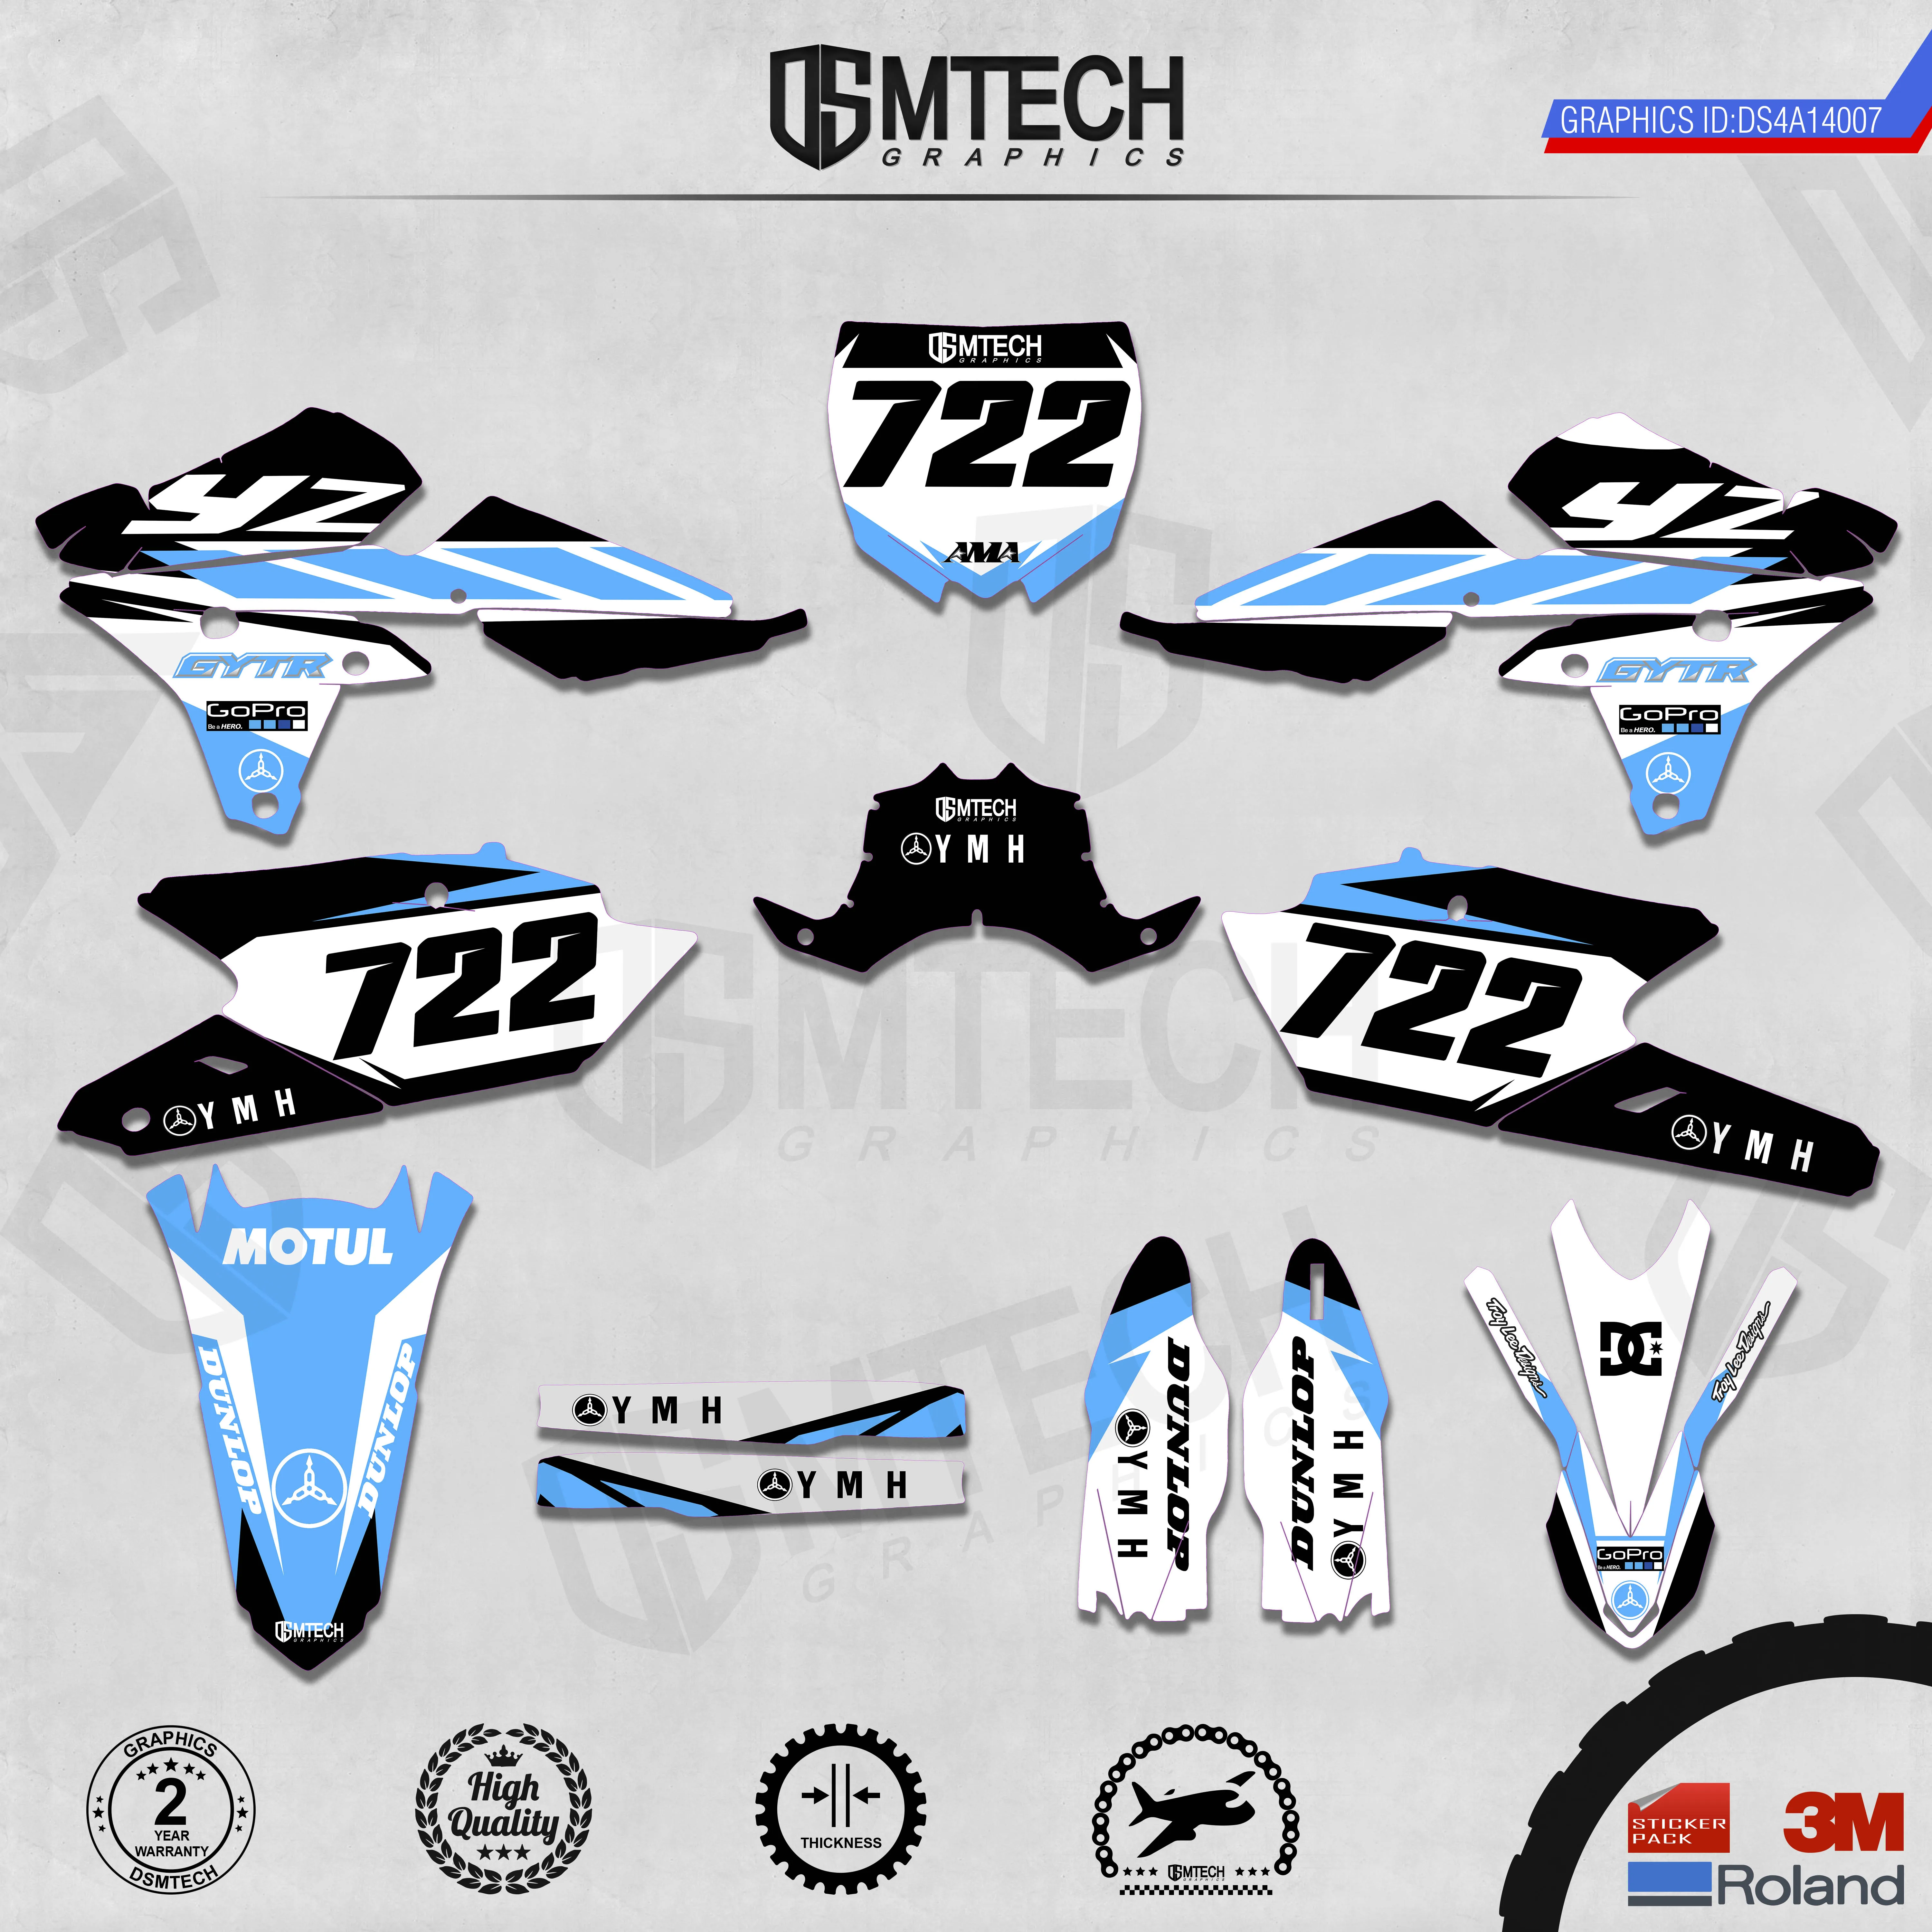 DSMTECH Customized Team Graphics Backgrounds Decals 3M Custom Stickers For 14-18 YZ250F 15-19 YZ250FX WRF250 14-17 YZ450F  007